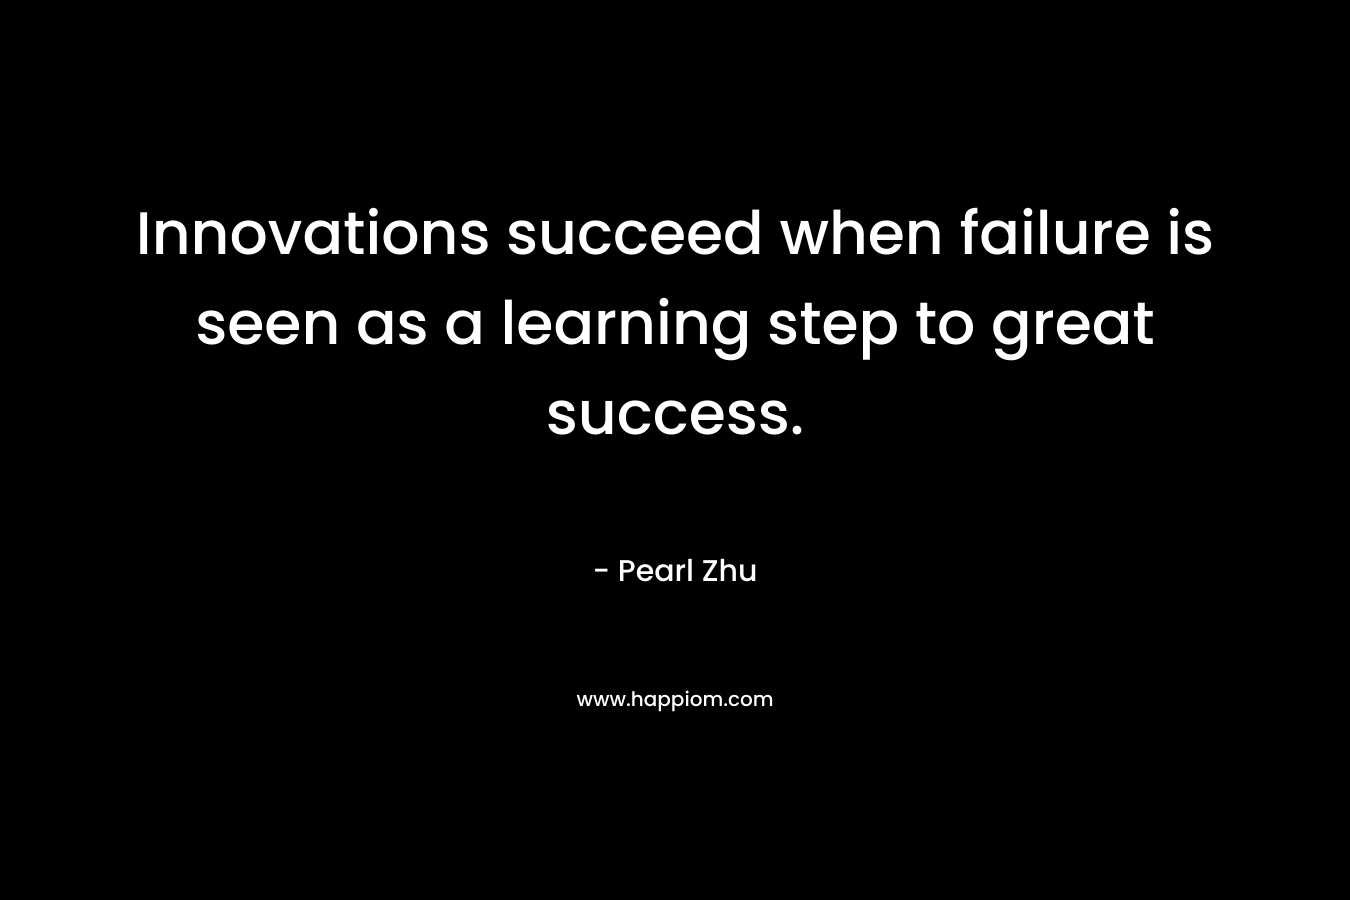 Innovations succeed when failure is seen as a learning step to great success.